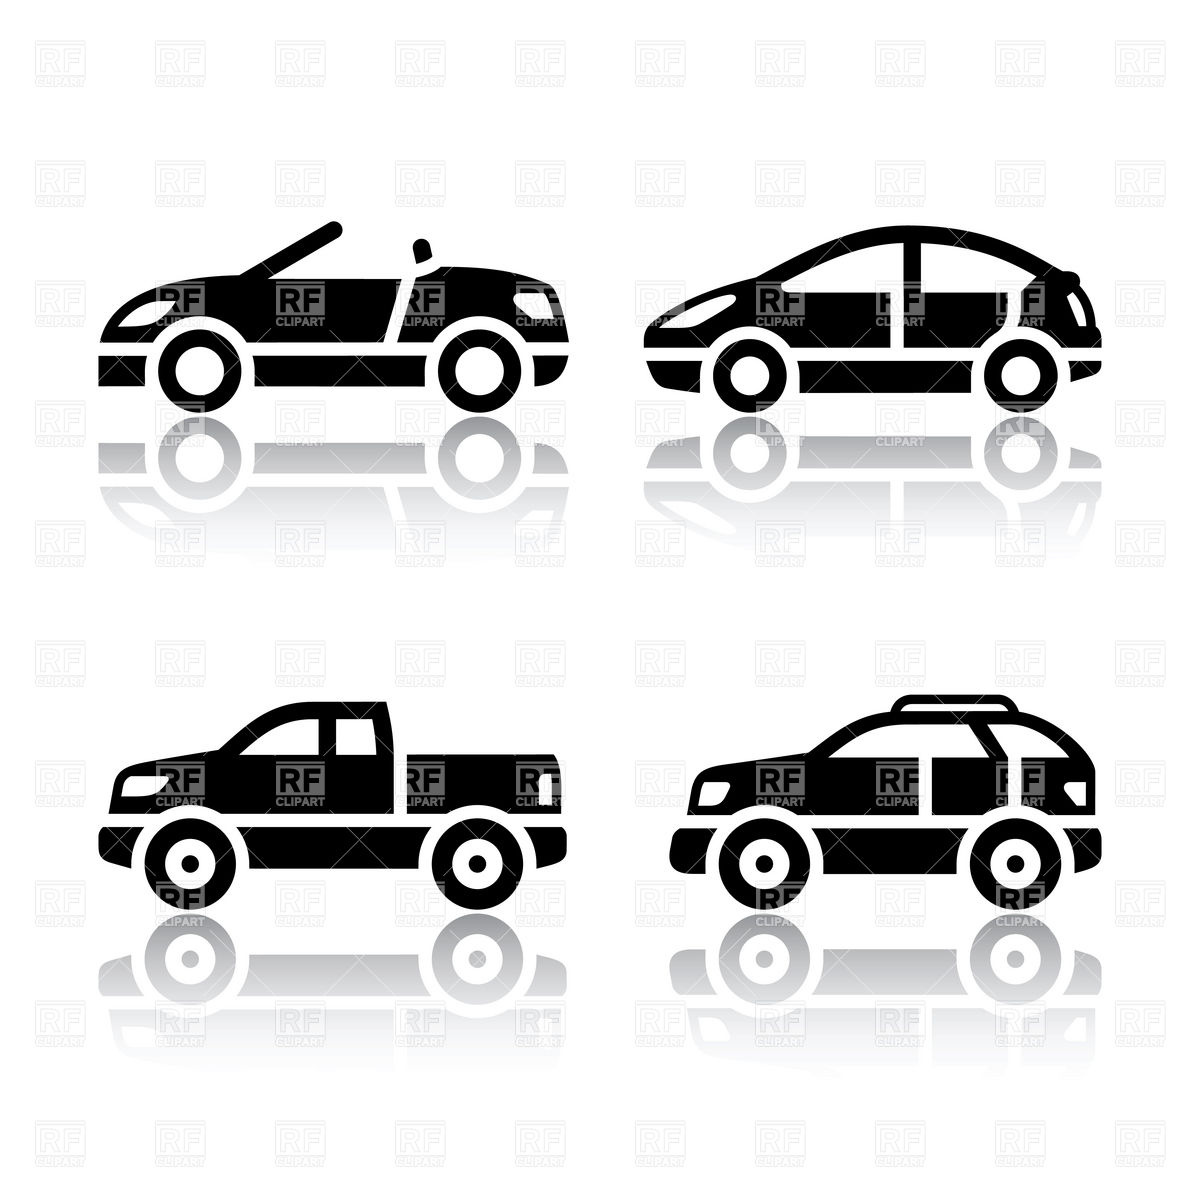 Automobiles   Suv Cabrio Hatchback And Pick Up Truck Icons 18099    